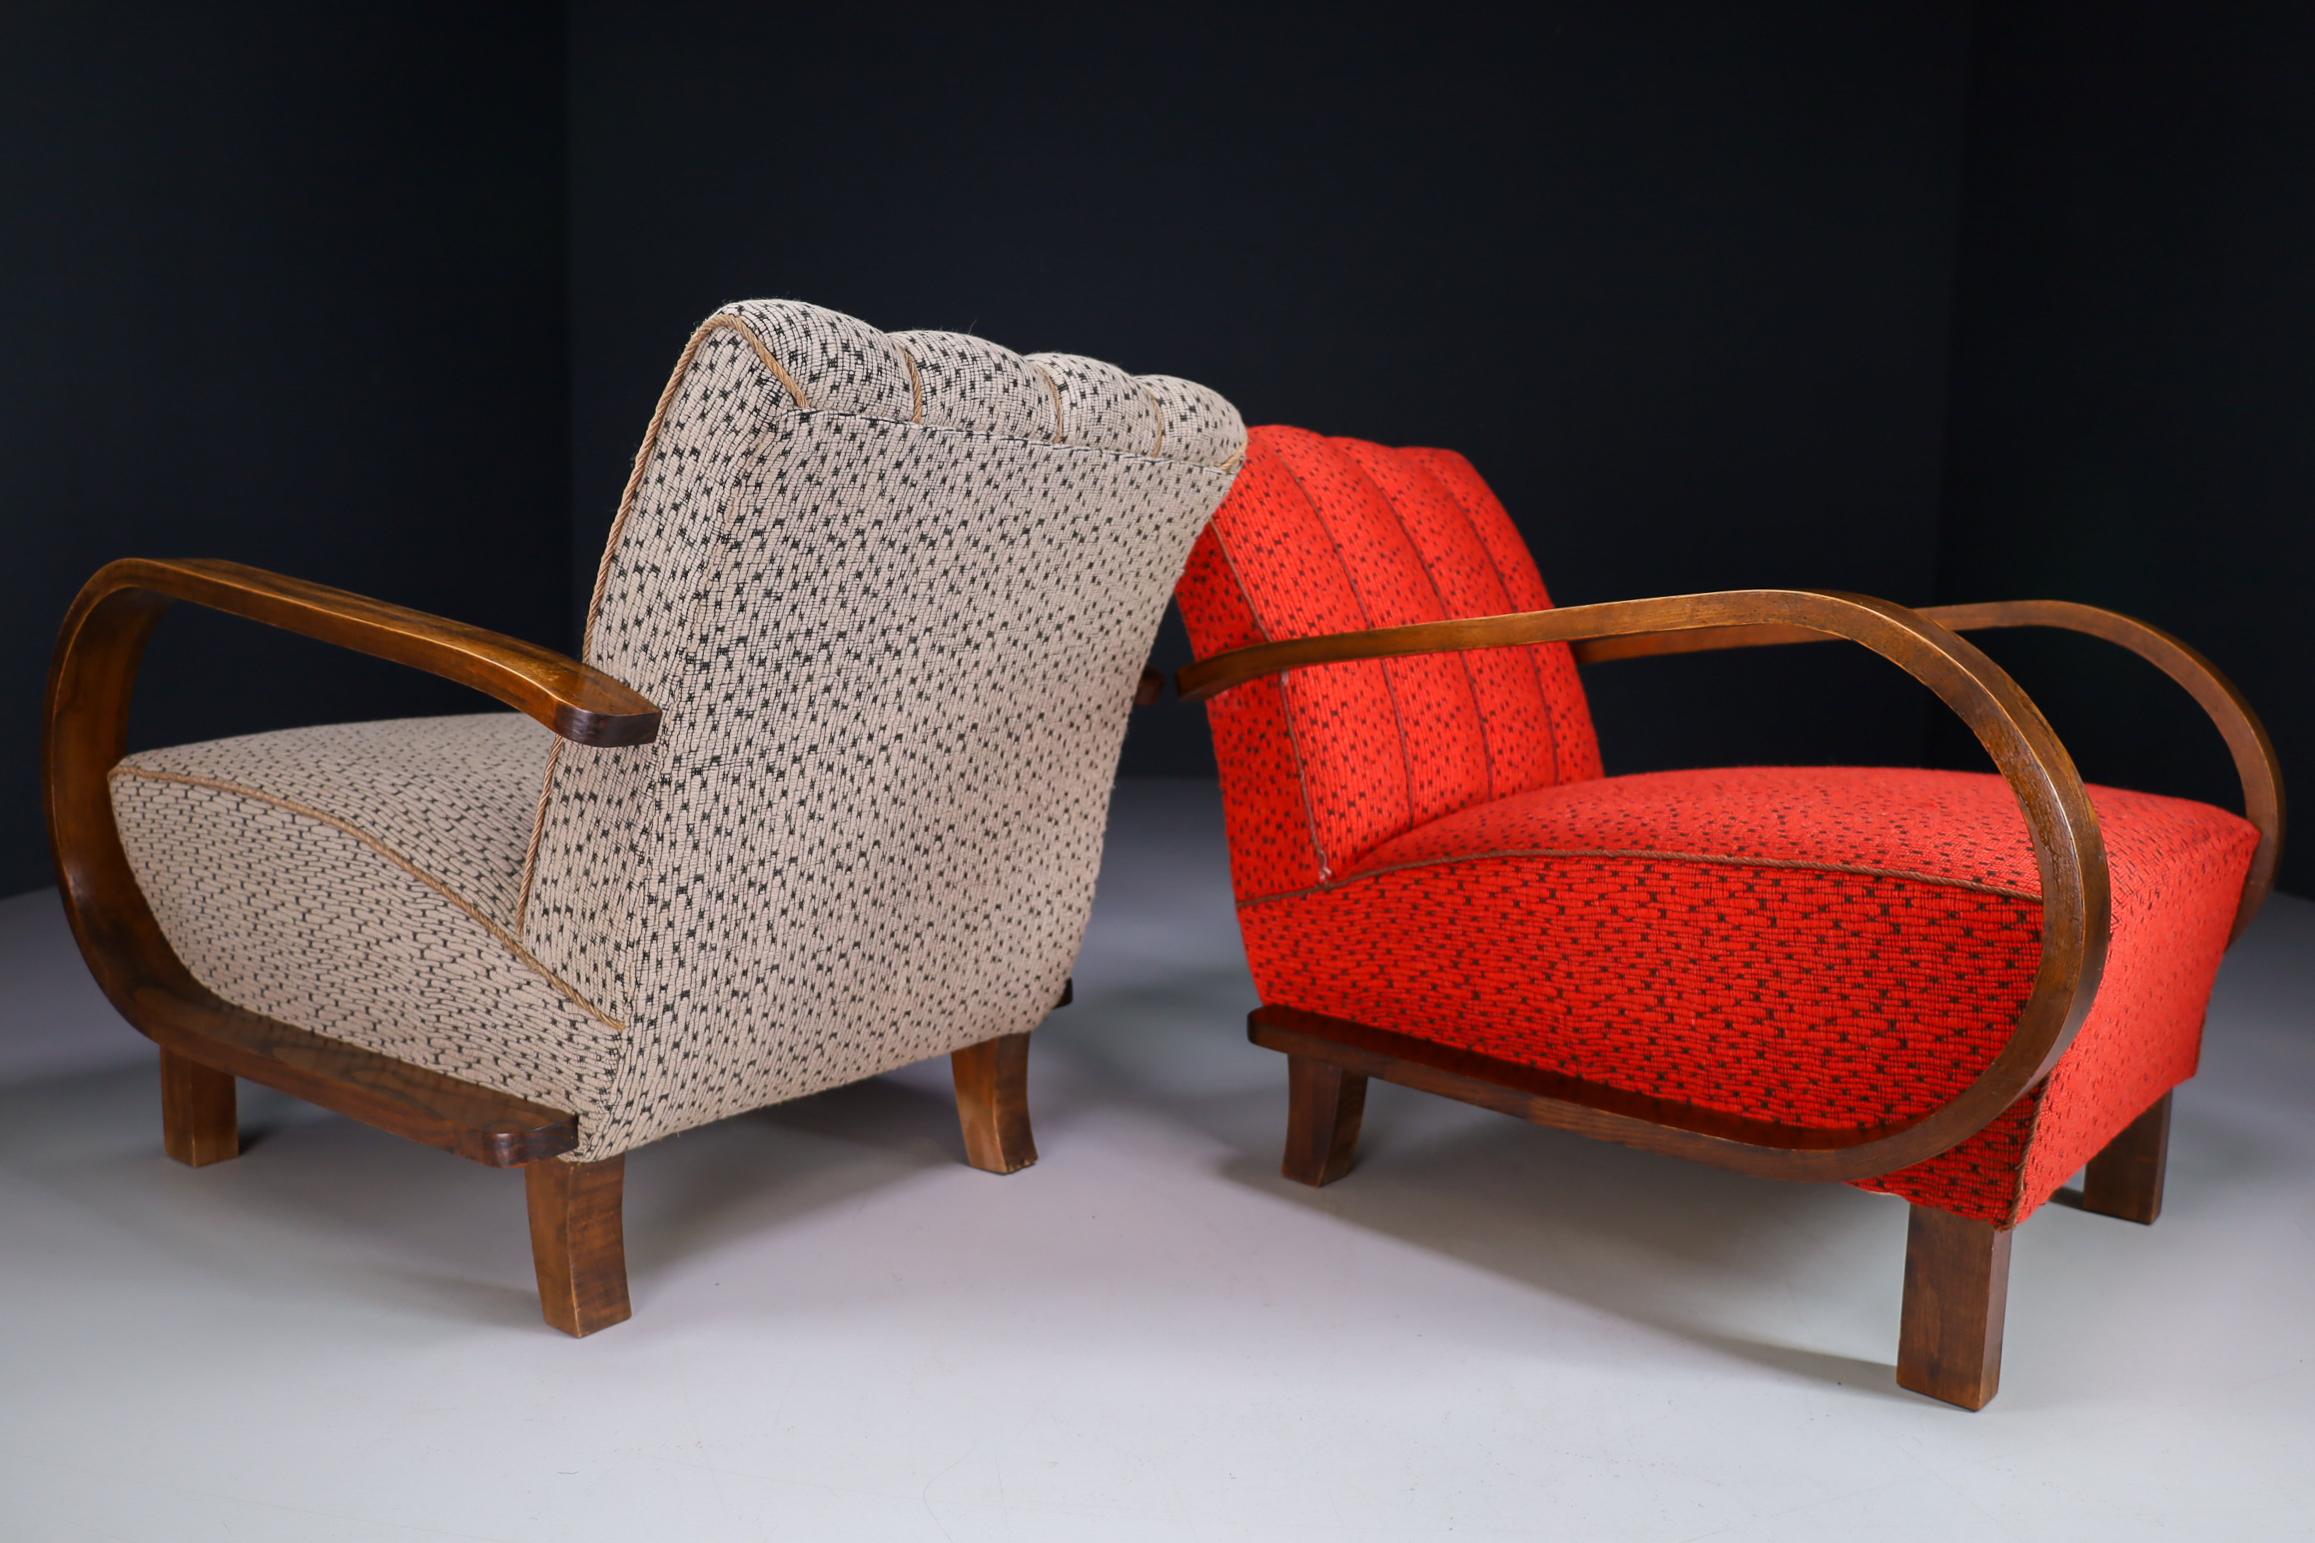 Art-Deco Armchairs in Bentwood and Original Fabric, Austria, 1930s For Sale 1